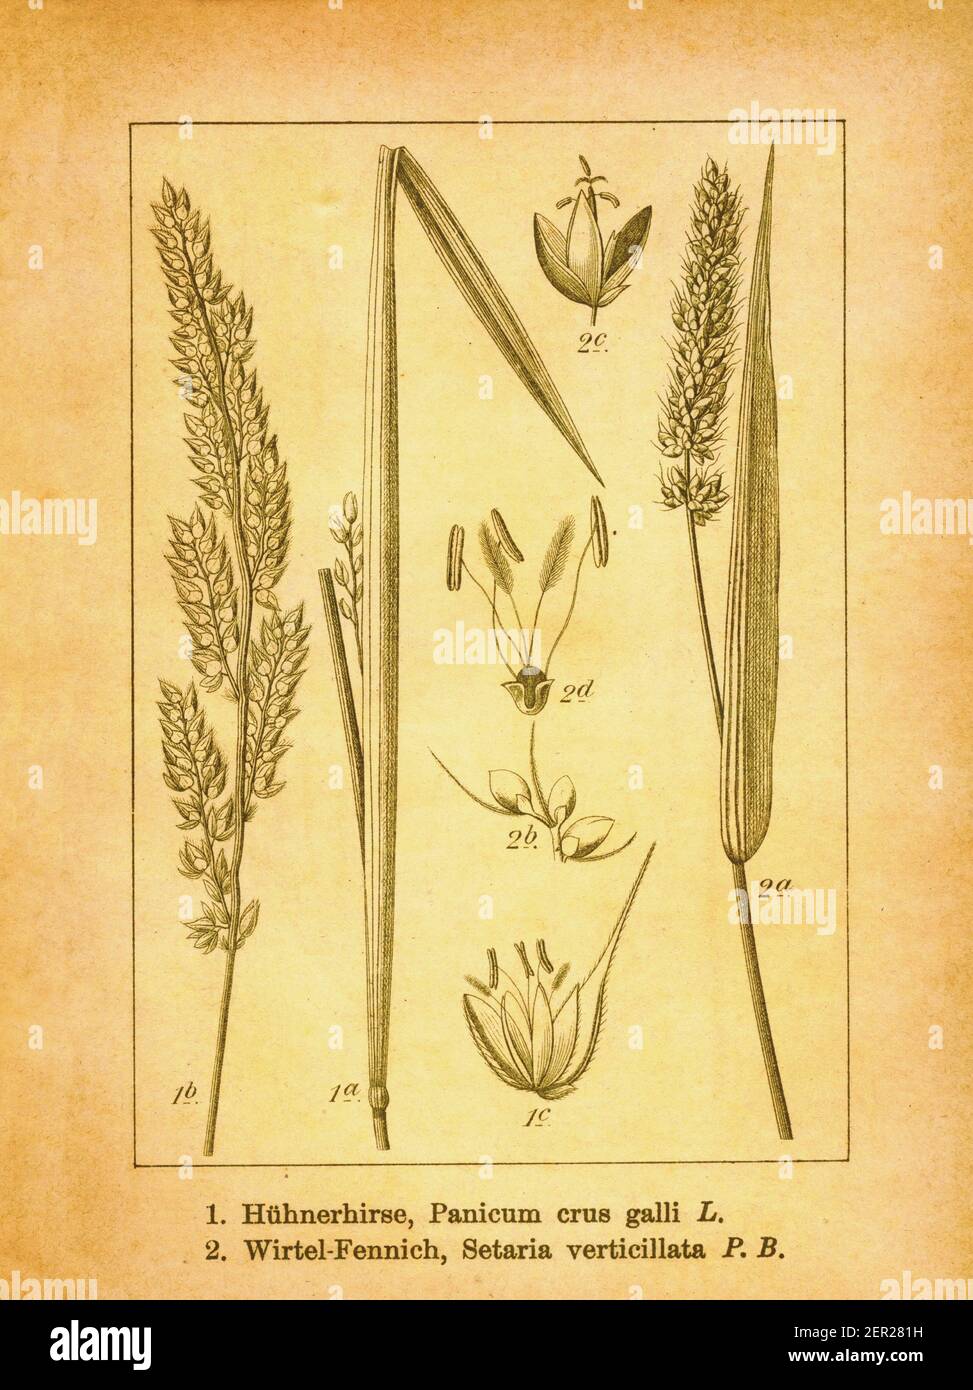 Antique 19th-century illustration of barnyard grass and hooked bristlegrass. Engraving by Jacob Sturm (1771-1848) from the book Deutschlands Flora in Stock Photo